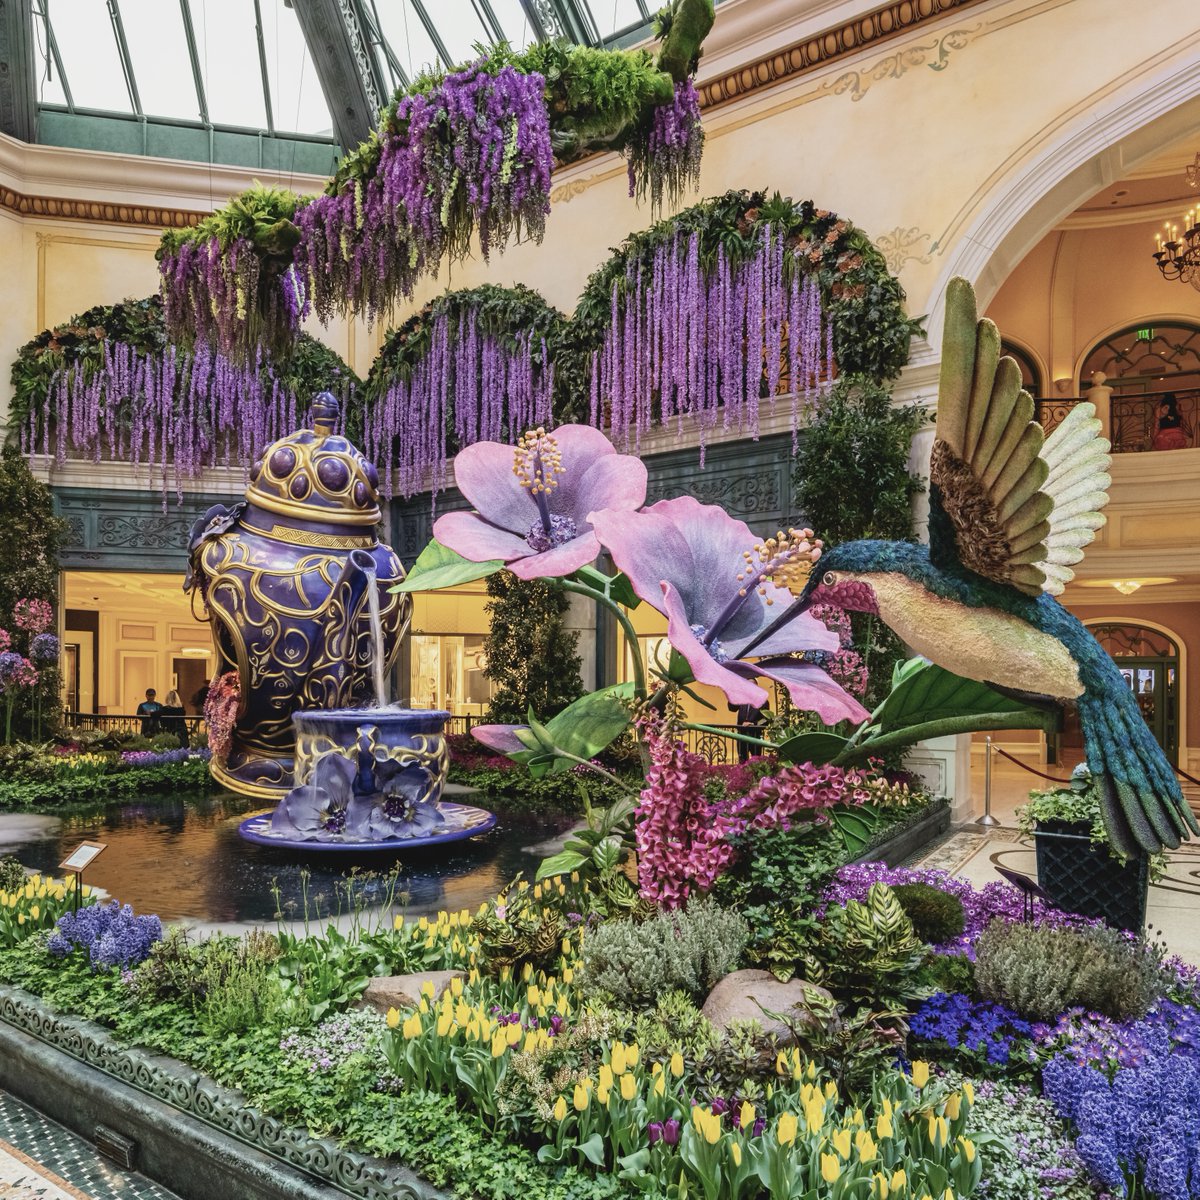 Captivated by the wonderful world of 'Tea and Tulips' in our Conservatory & Botanical Gardens. Savor the sweetness of spring with Bellagio At Home's fragrance 'Tea Garden' at spr.ly/6015ZBm9T.